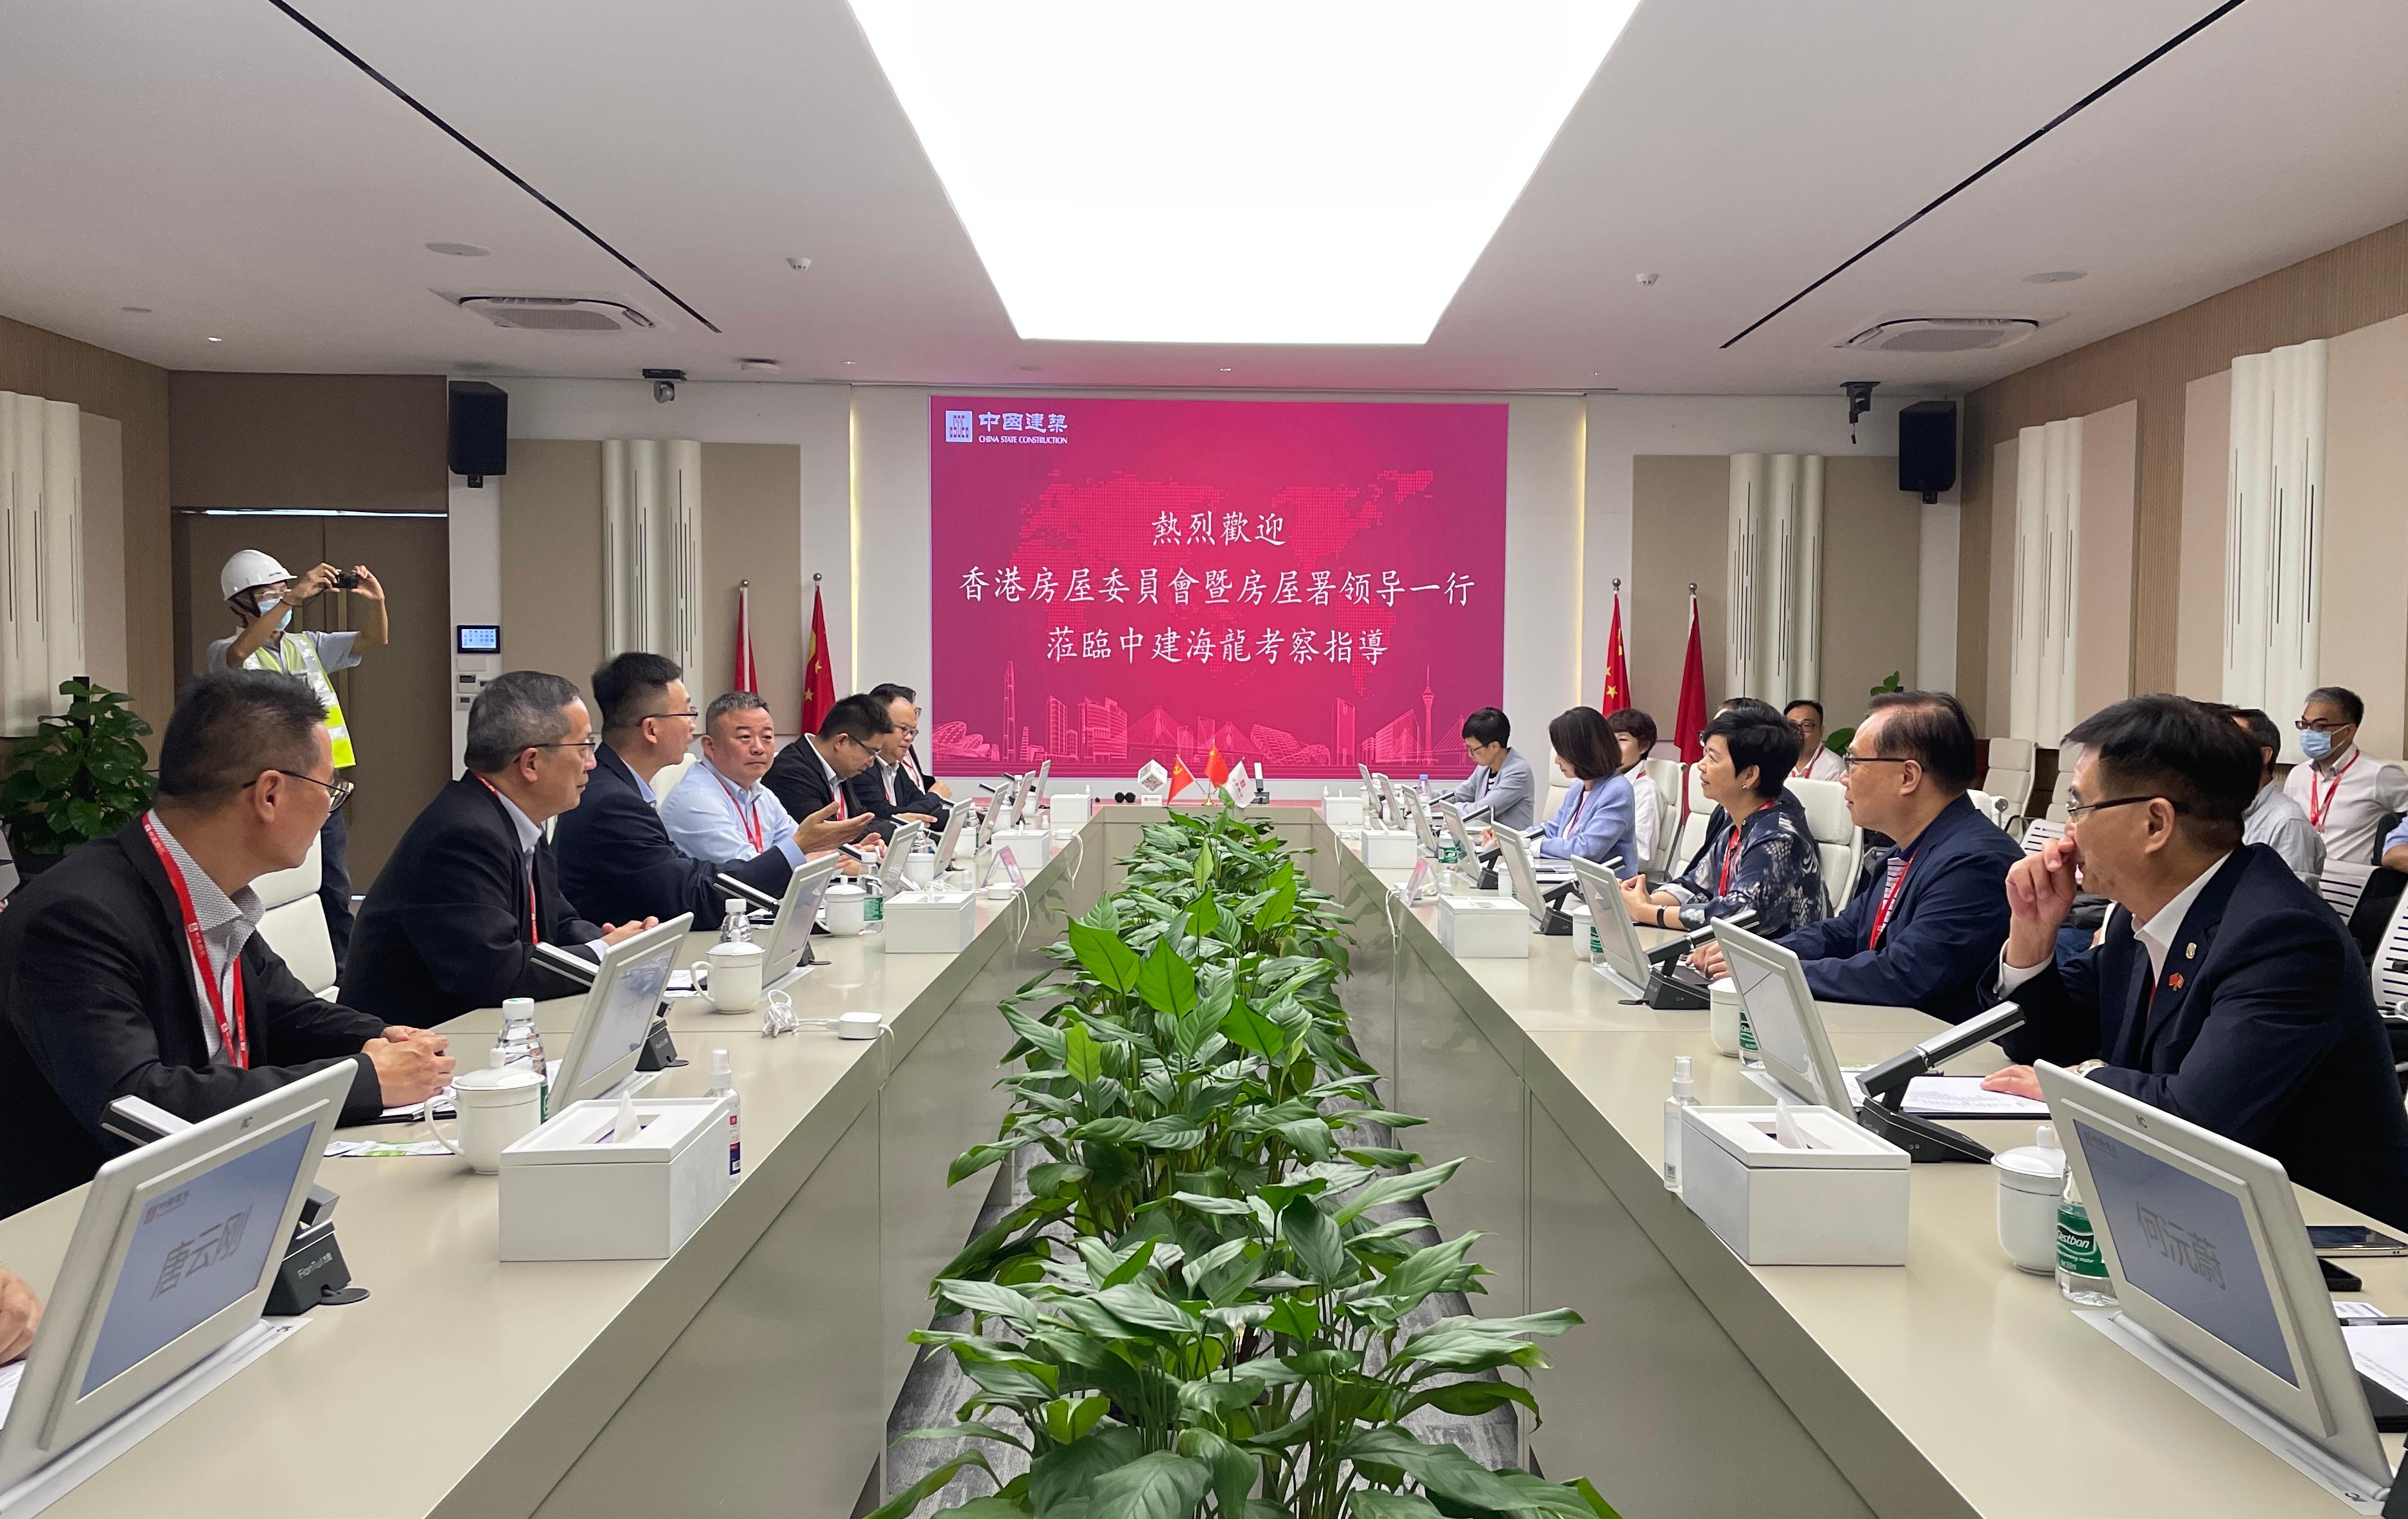 The Secretary for Housing and Chairman of the Hong Kong Housing Authority (HA), Ms Winnie Ho, and members of the HA Building Committee and Tender Committee, visited Foshan and Zhuhai today (July 19) to get an understanding of the latest situation regarding research and development and applications of innovative construction technologies in the Guangdong-Hong Kong-Macao Greater Bay Area cities. Photo shows Ms Ho (third right) and the Chairman of the Building Committee, Dr Johnnie Chan (second right), visiting the Guangdong Hailong Construction Technology Company Limited in Zhuhai.